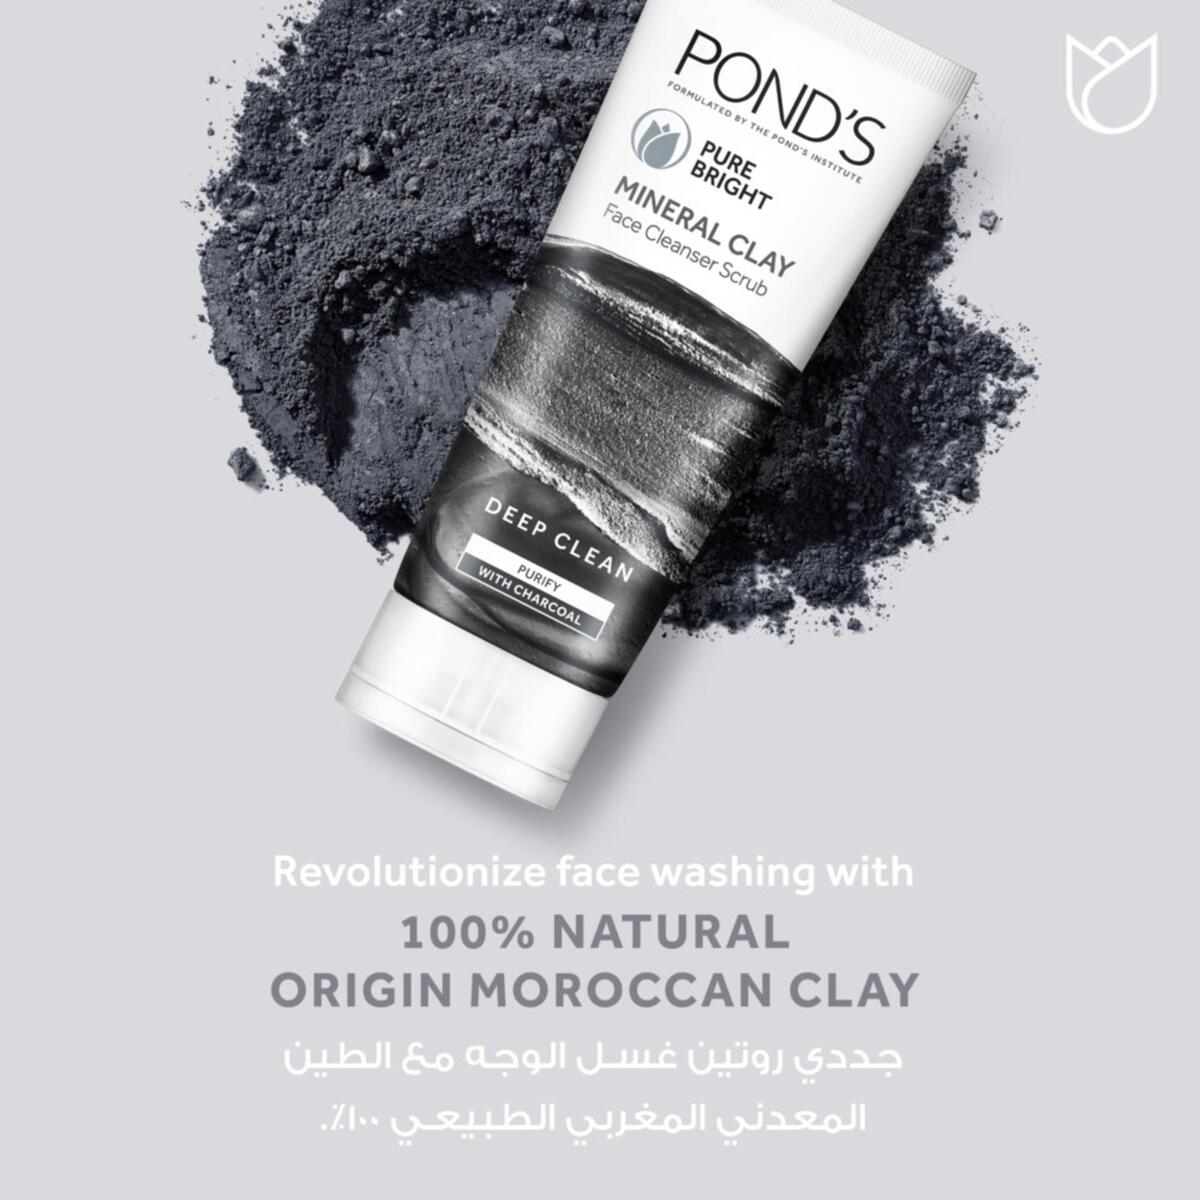 Pond's Pure Bright Mineral Clay Face Cleanser Scrub 90 g